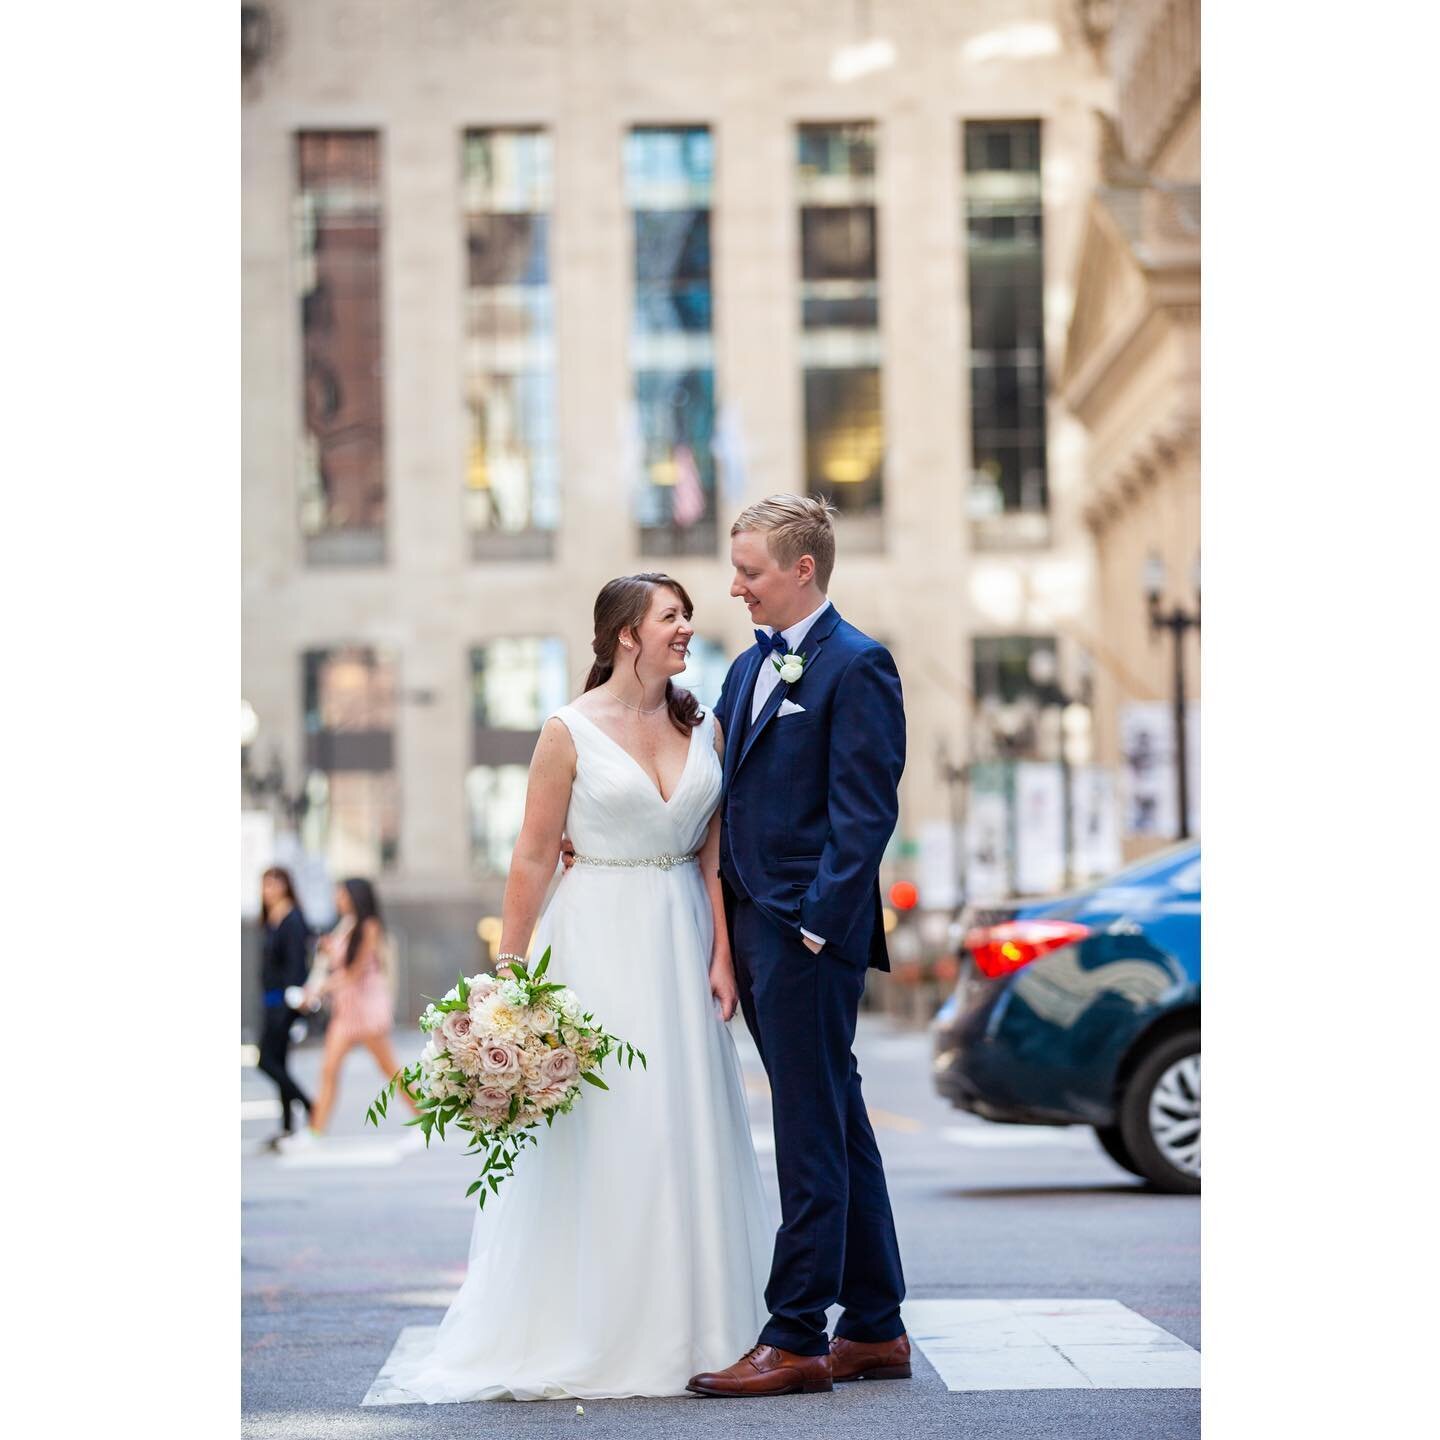 Board of Trade shot! Evan &amp; Jill 9.7.2019
.
.
.
#eventspace #eventvenue #chicagoweddings #instawed #weddingplanning #chicagowedding #chicagoluxurywedding #chicagobride #chicagogroom #luxuryweddings #tietheknot #chicagoluxury planner #shesaidyes #